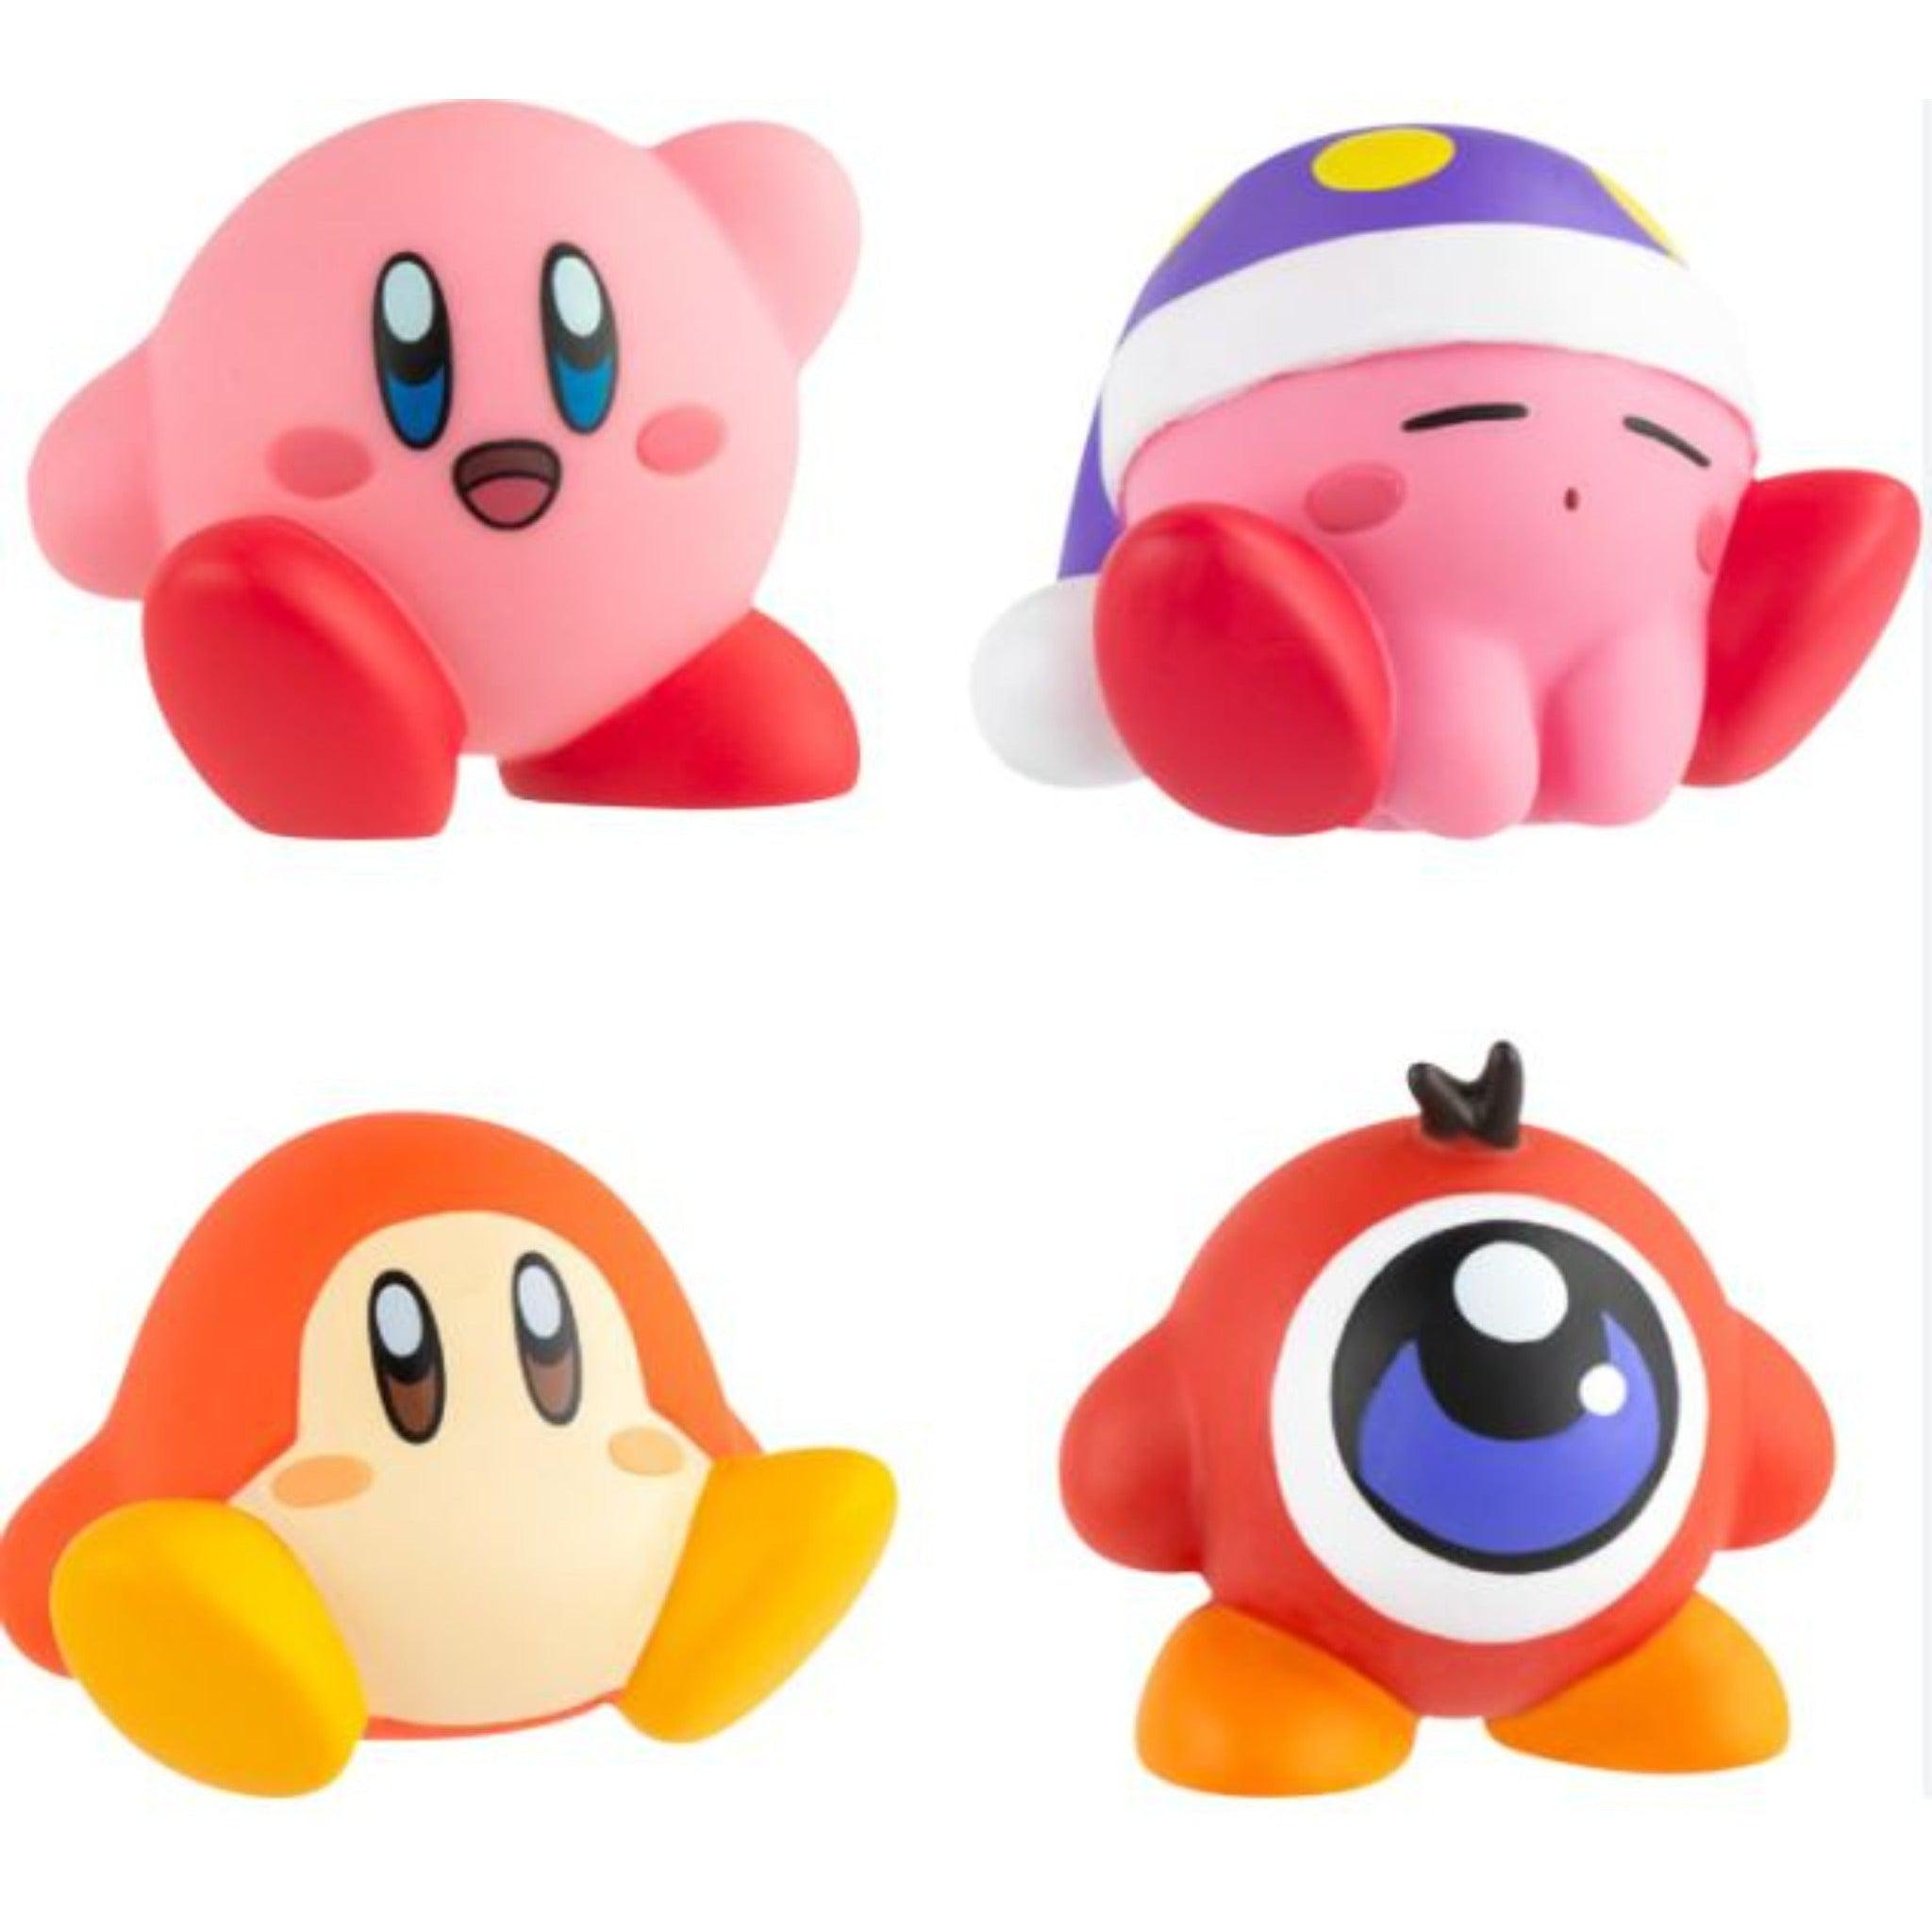 TOMY-Gachapon Kirby Mascot Figures - Assorted Styles-L67942A-Legacy Toys